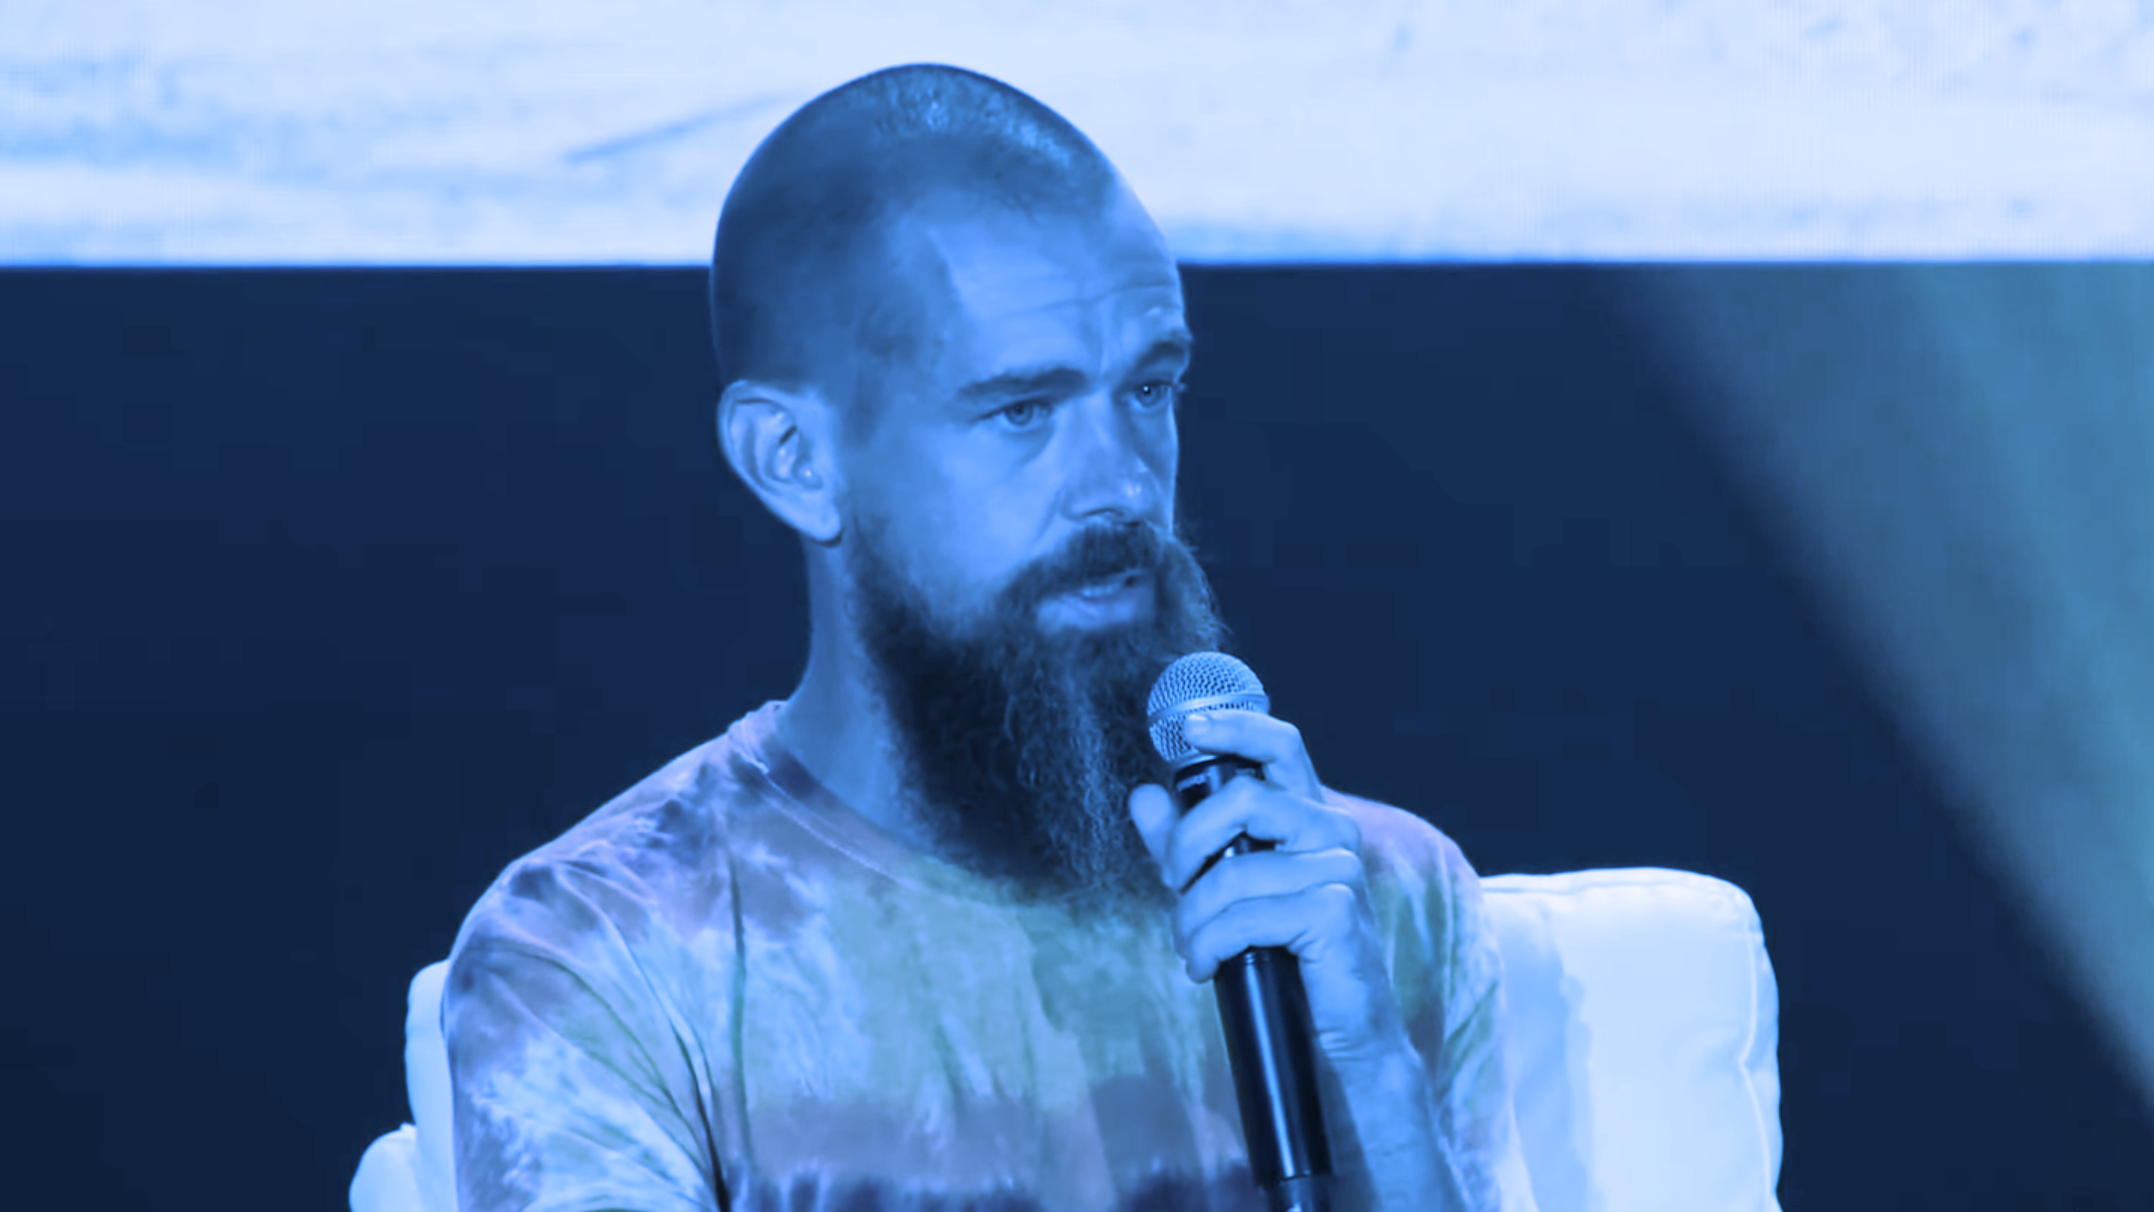 Bitcoin Advocate Jack Dorsey Steps Down as Twitter CEO